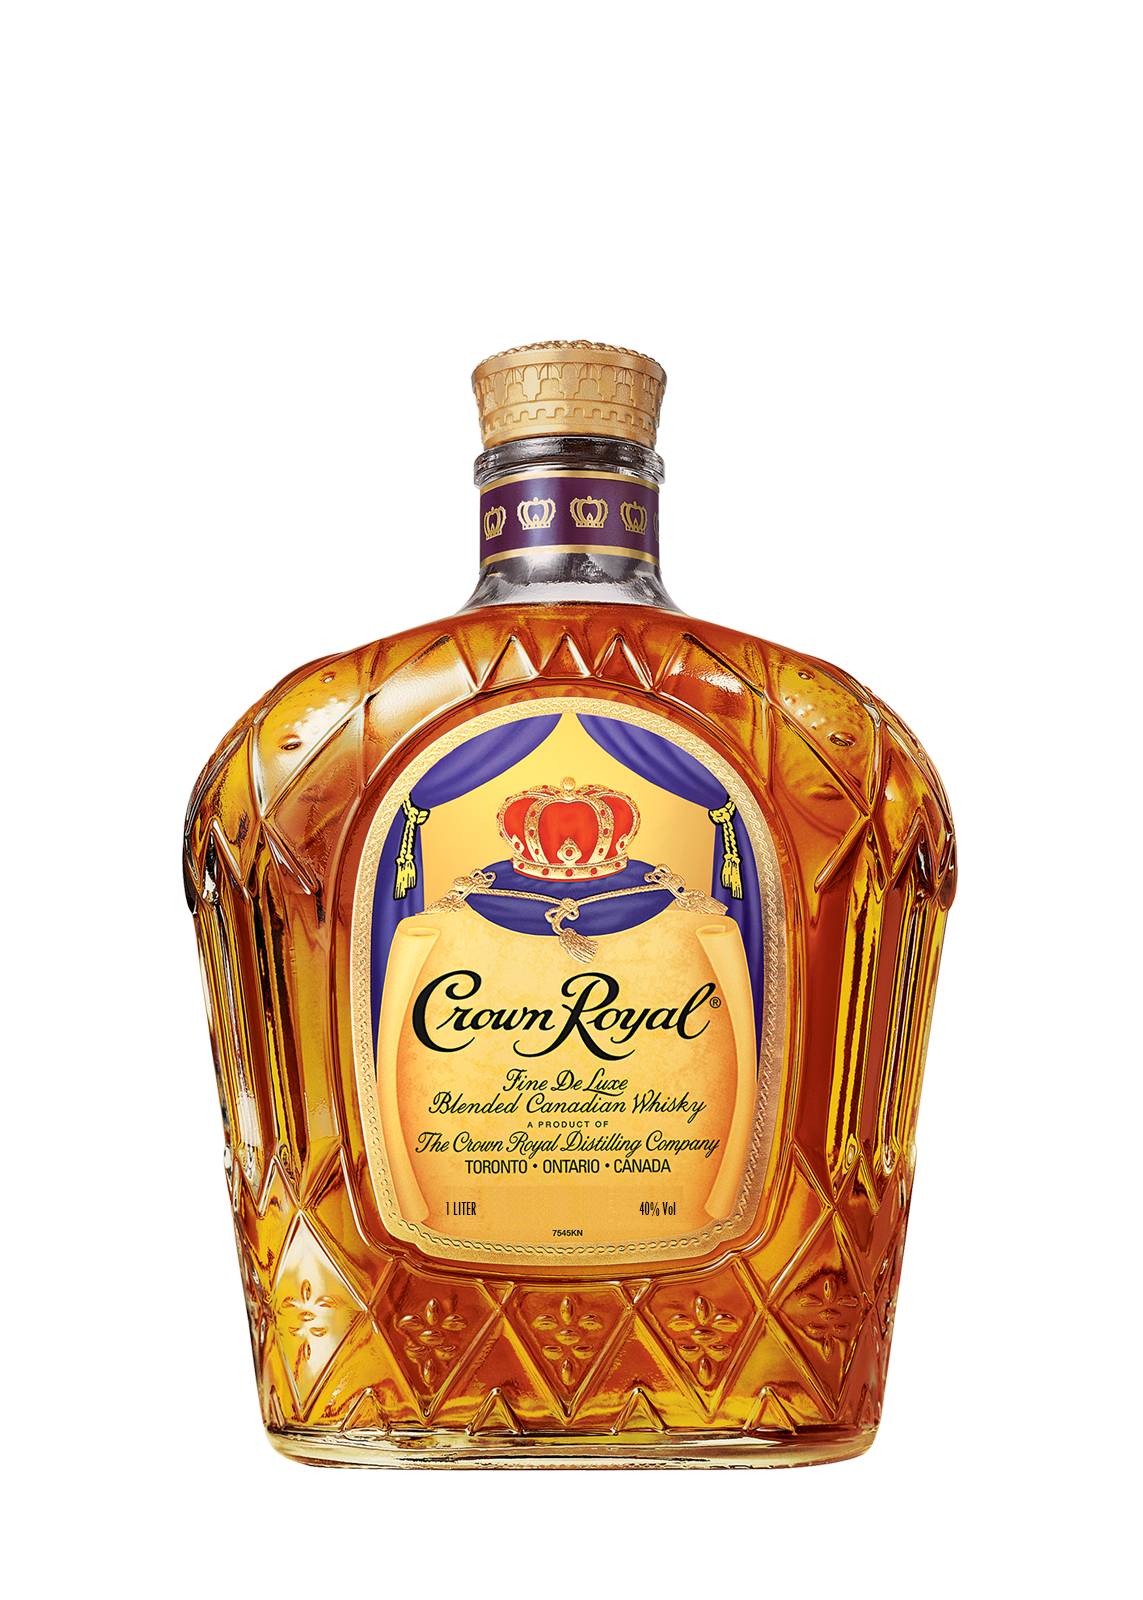 Details 64+ crown royal flavors and bags - in.duhocakina